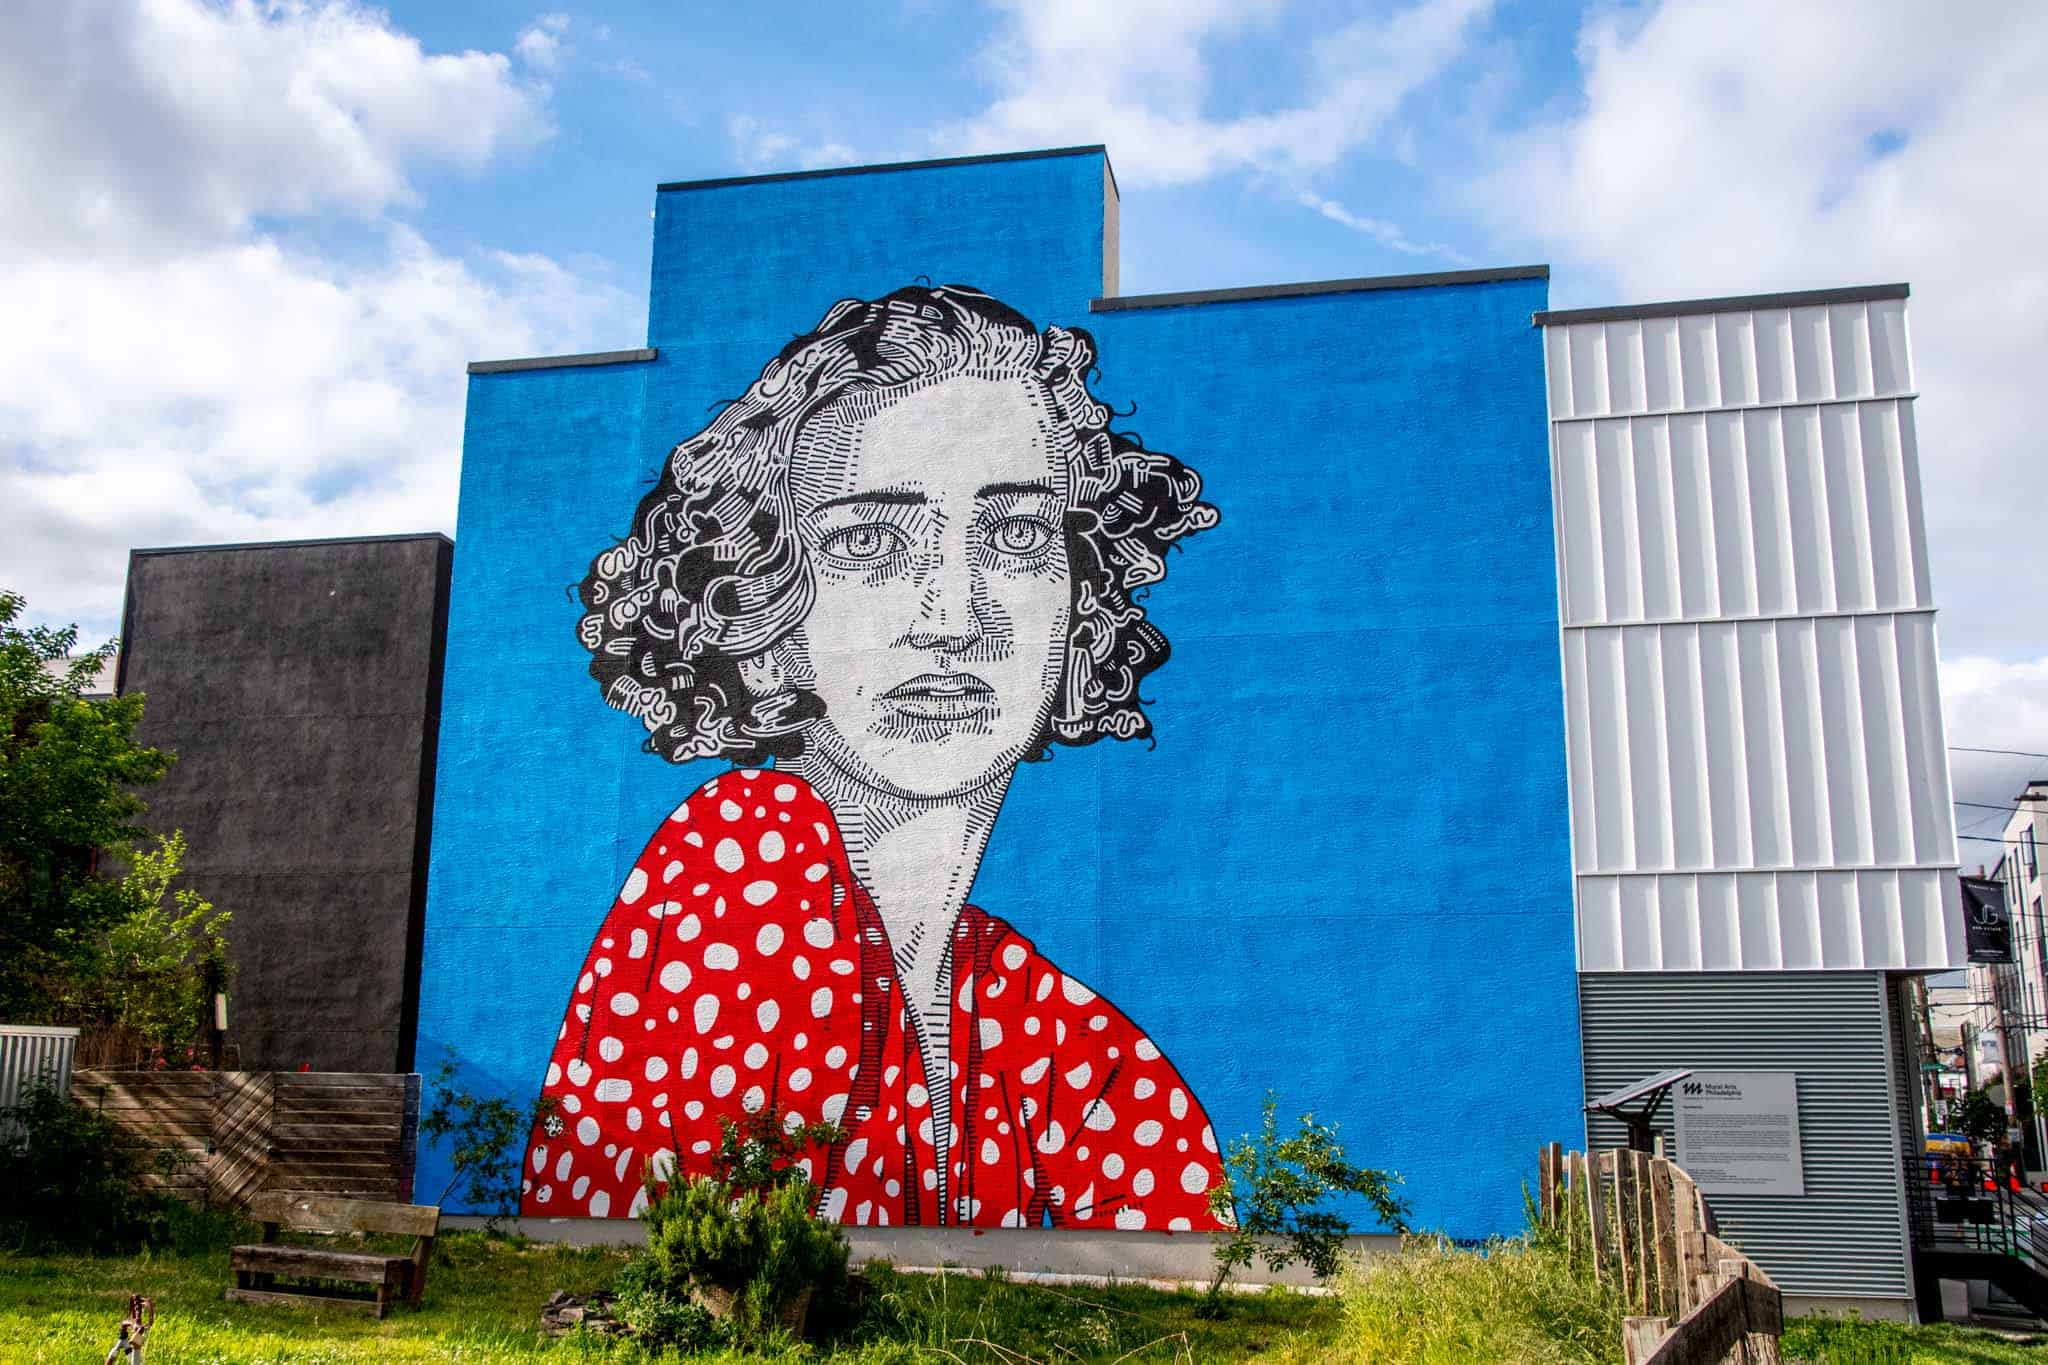 Persistence, a mural in Fishtown showing a woman in a red polka dot dress